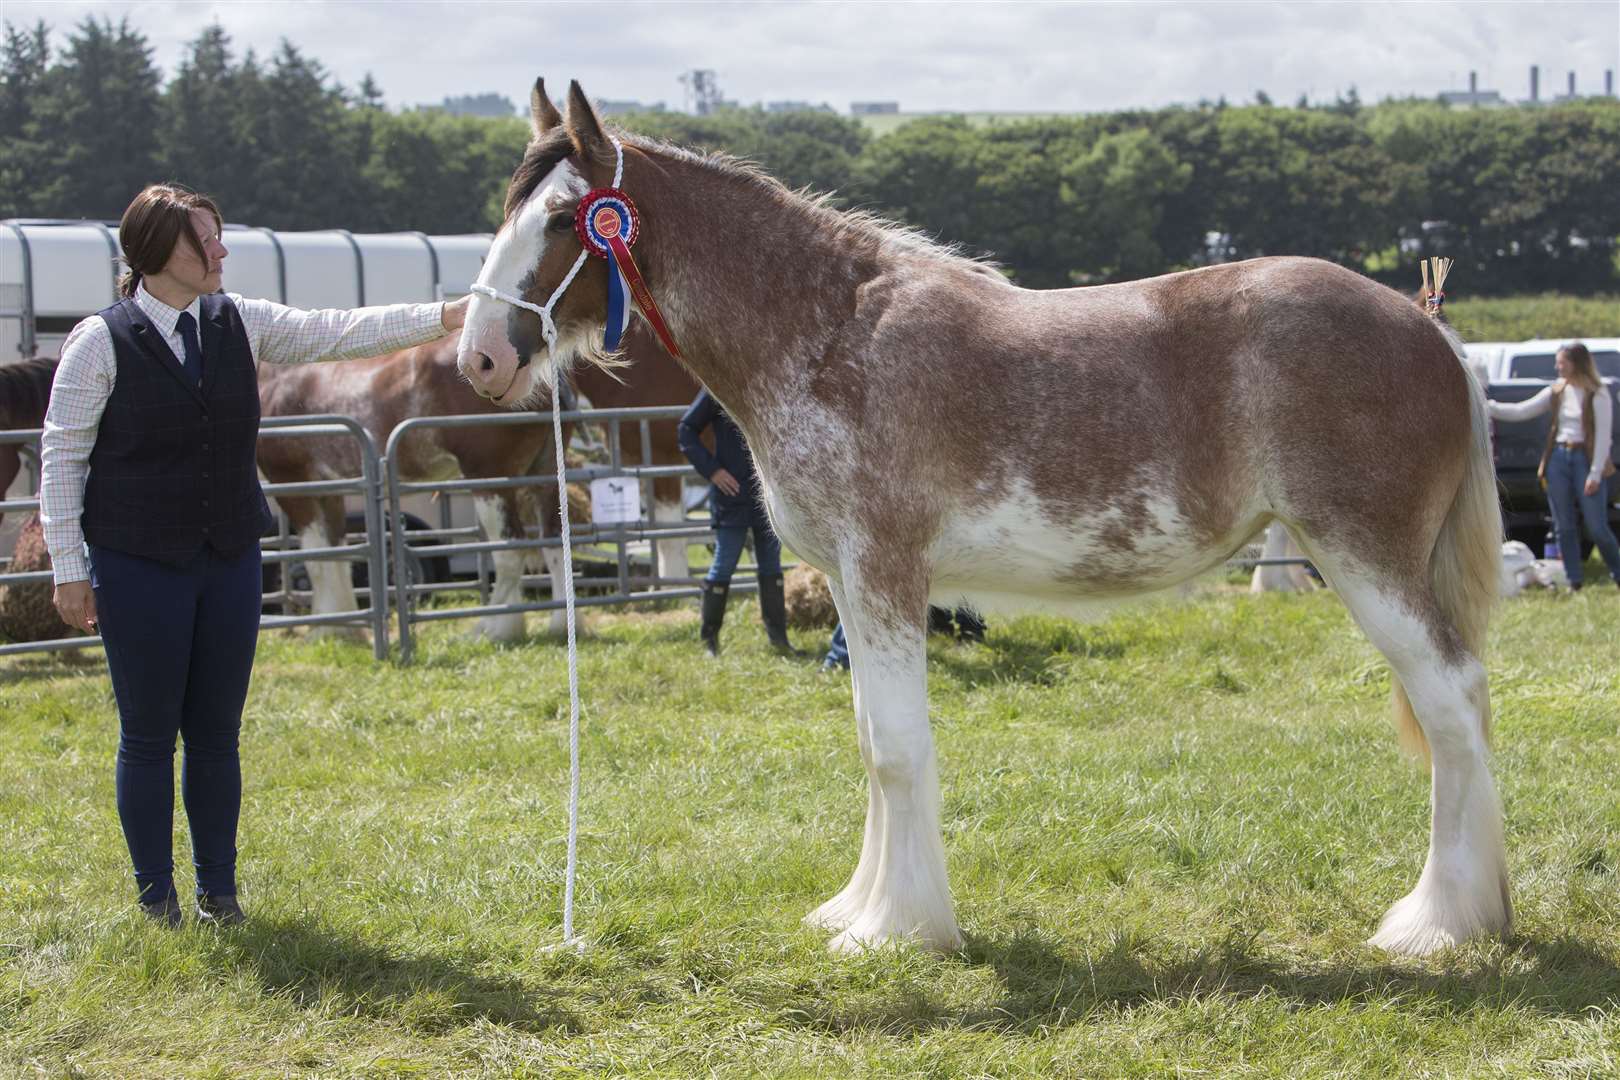 Jackie Munro with the champion Clydesdale from M W & J L Munro, Gersa Clydesdales. Gersa Lady Emma is a yearling filly that was reserve champion last year as a foal. She is out of Gersa Lady Lauren and by Collessie Monarch. Picture: Robert MacDonald / Northern Studios